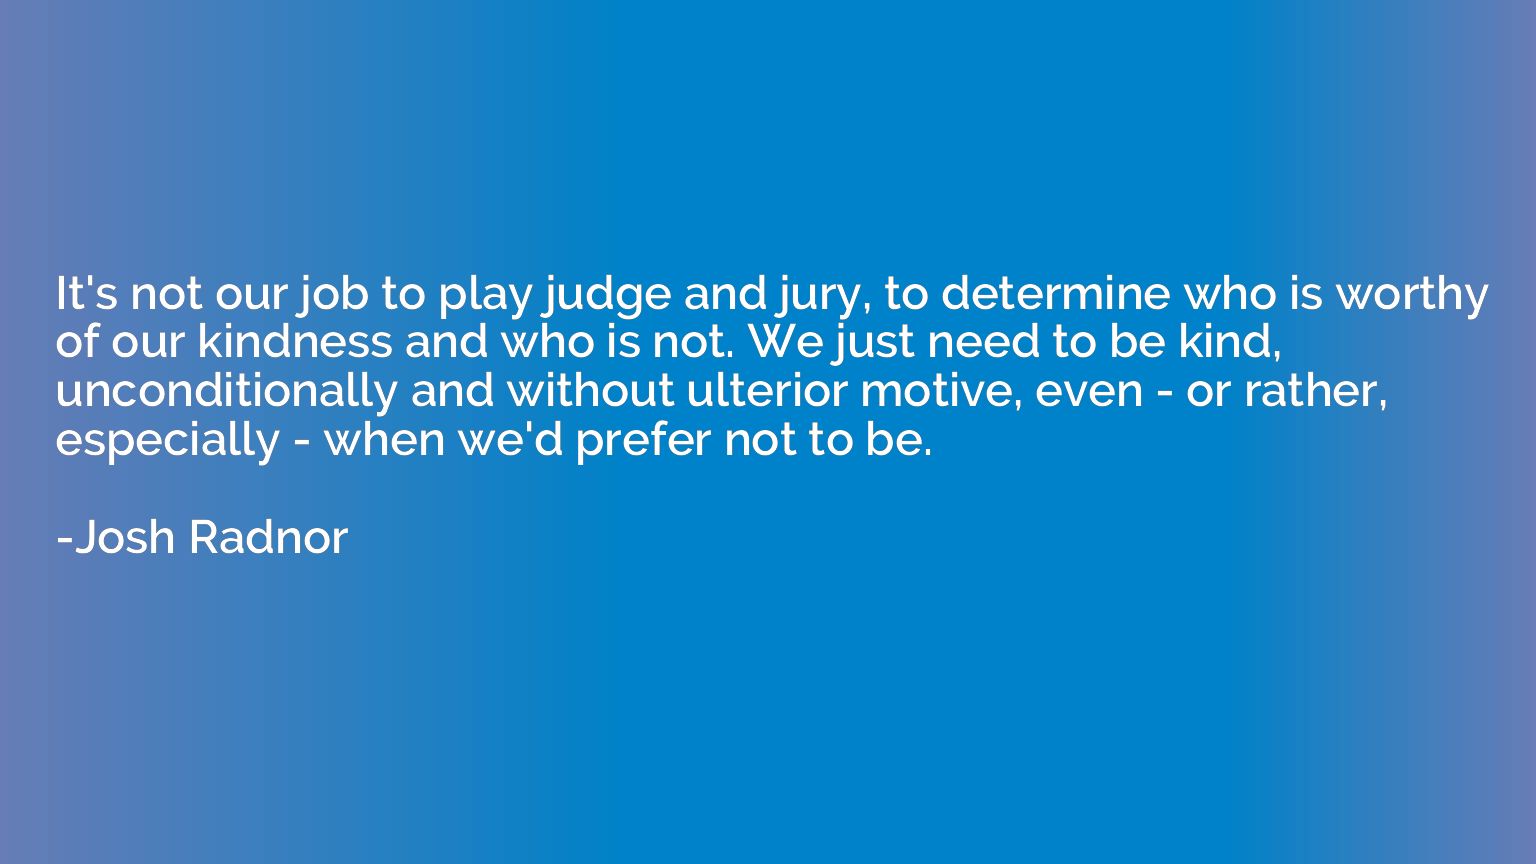 It's not our job to play judge and jury, to determine who is